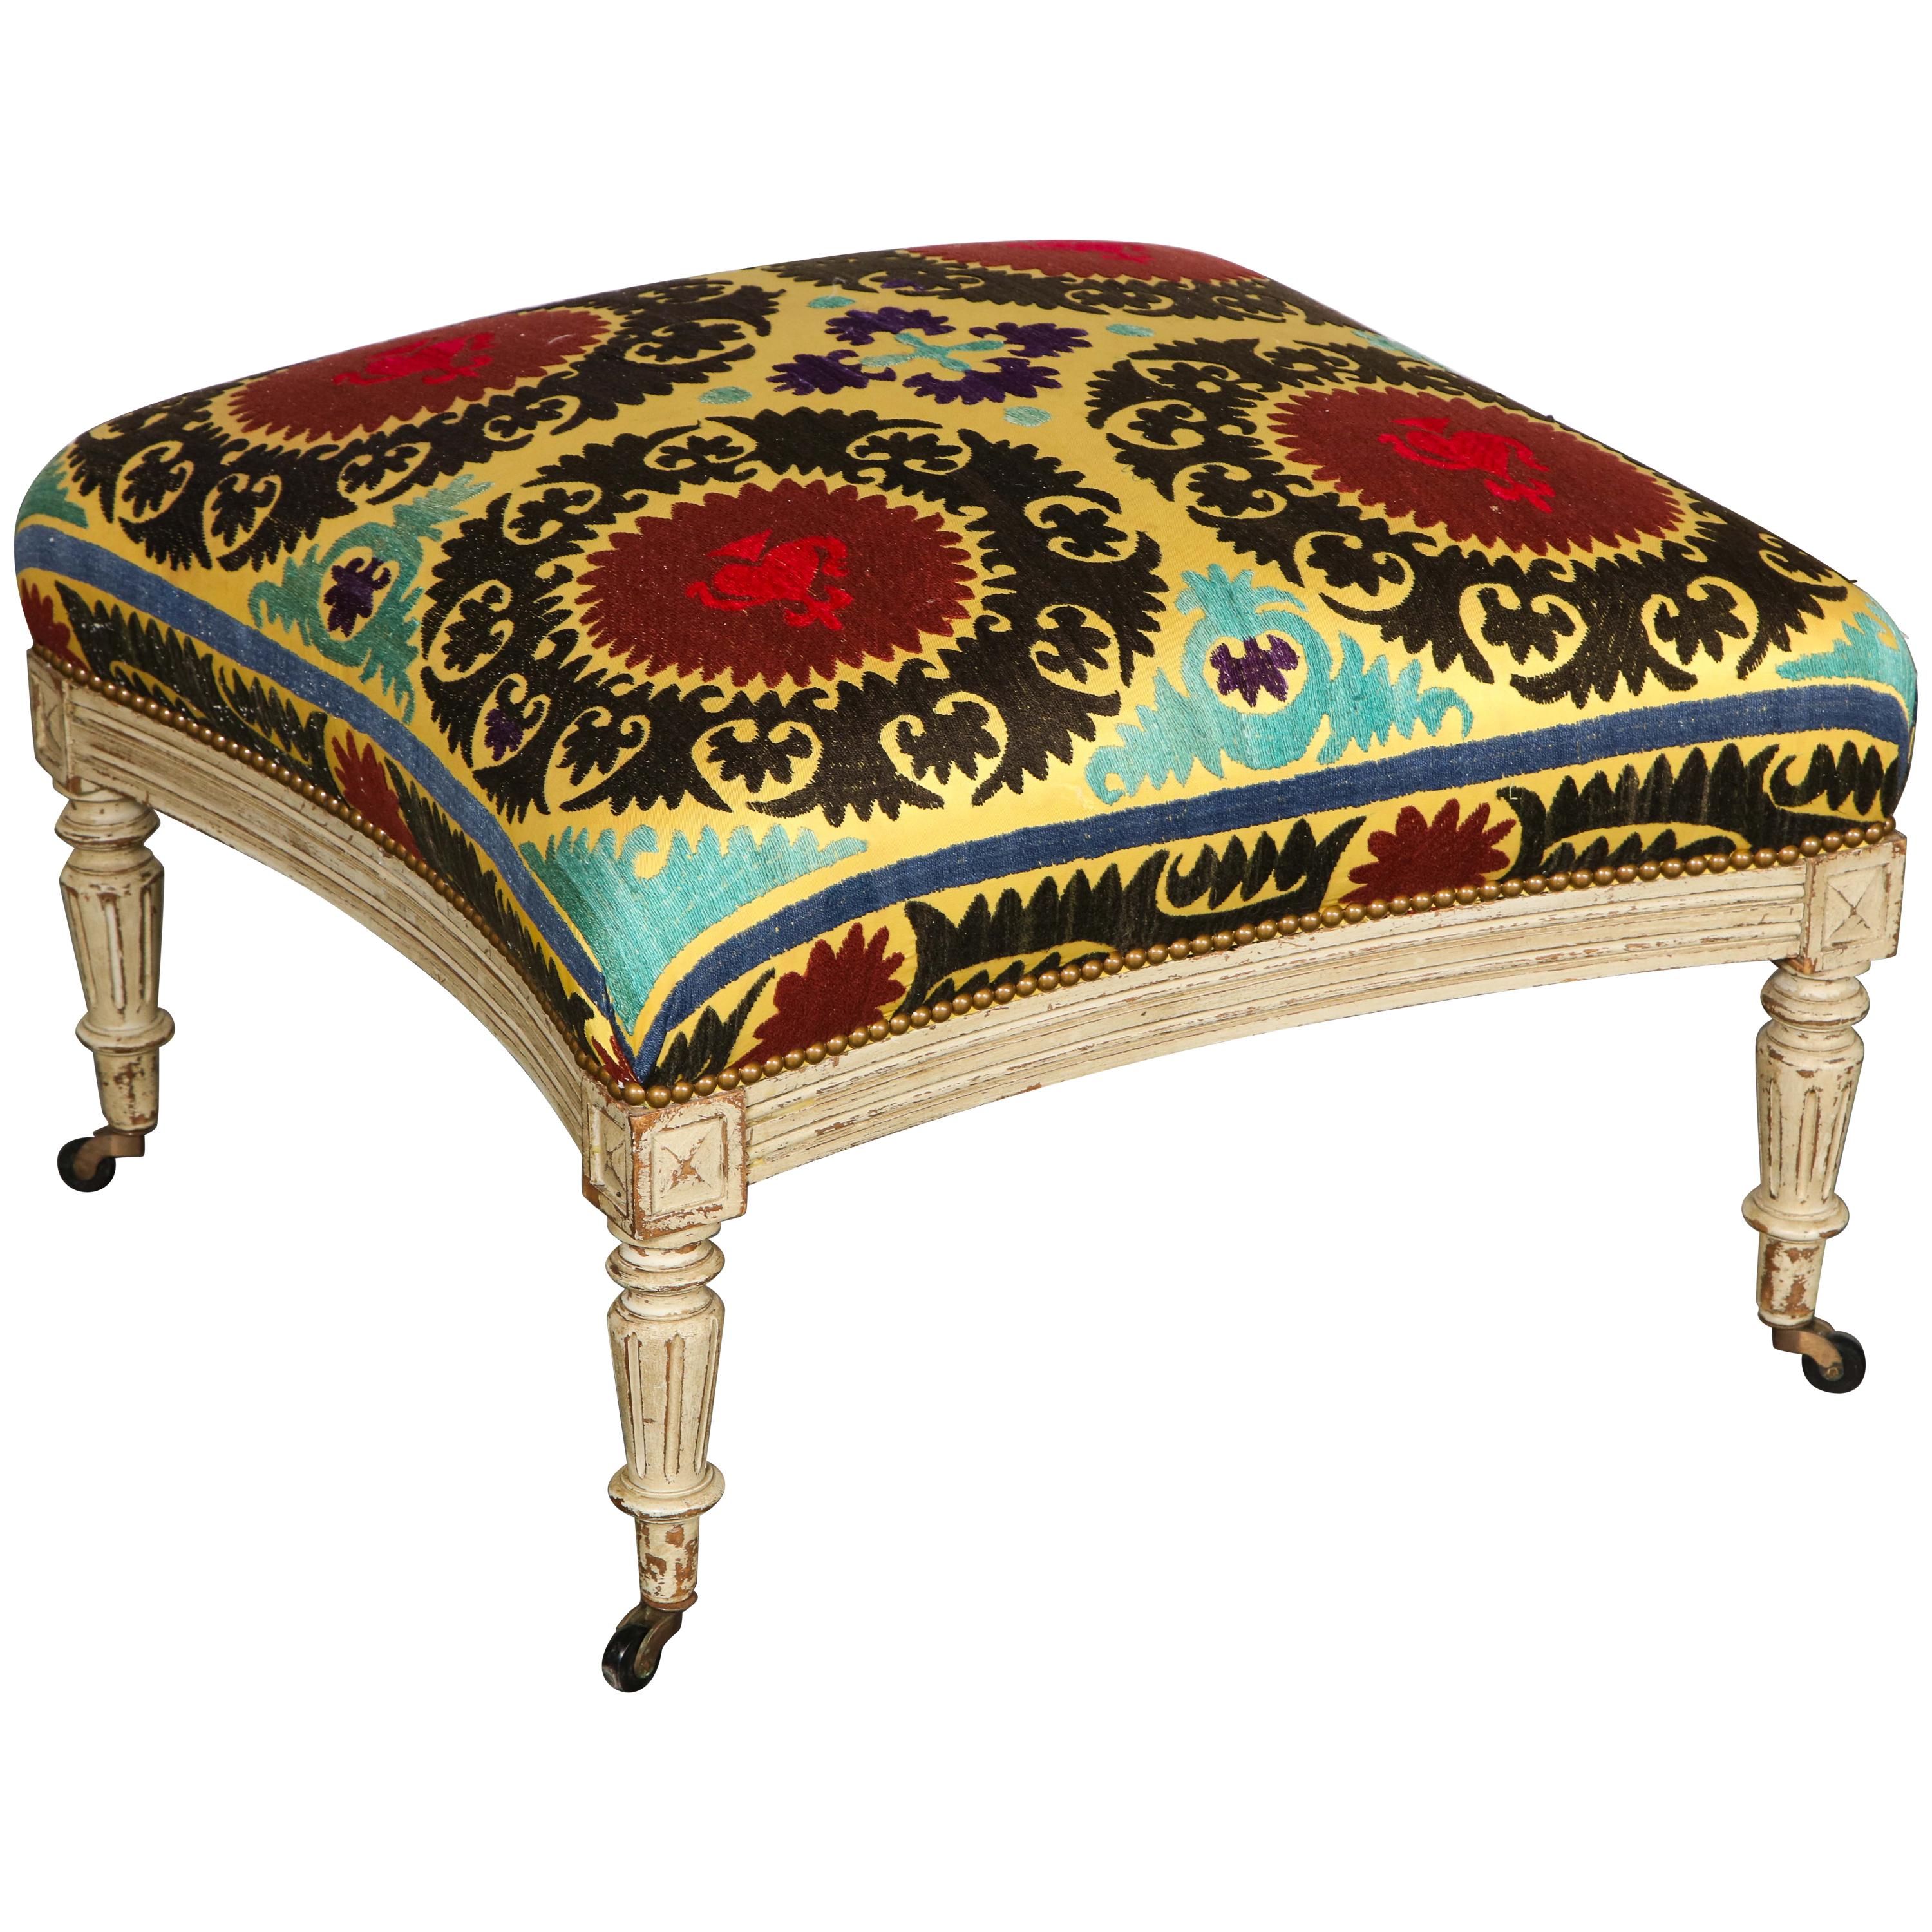 Louis XVI Style Suzani-Upholstered Square Grey-Painted Ottoman